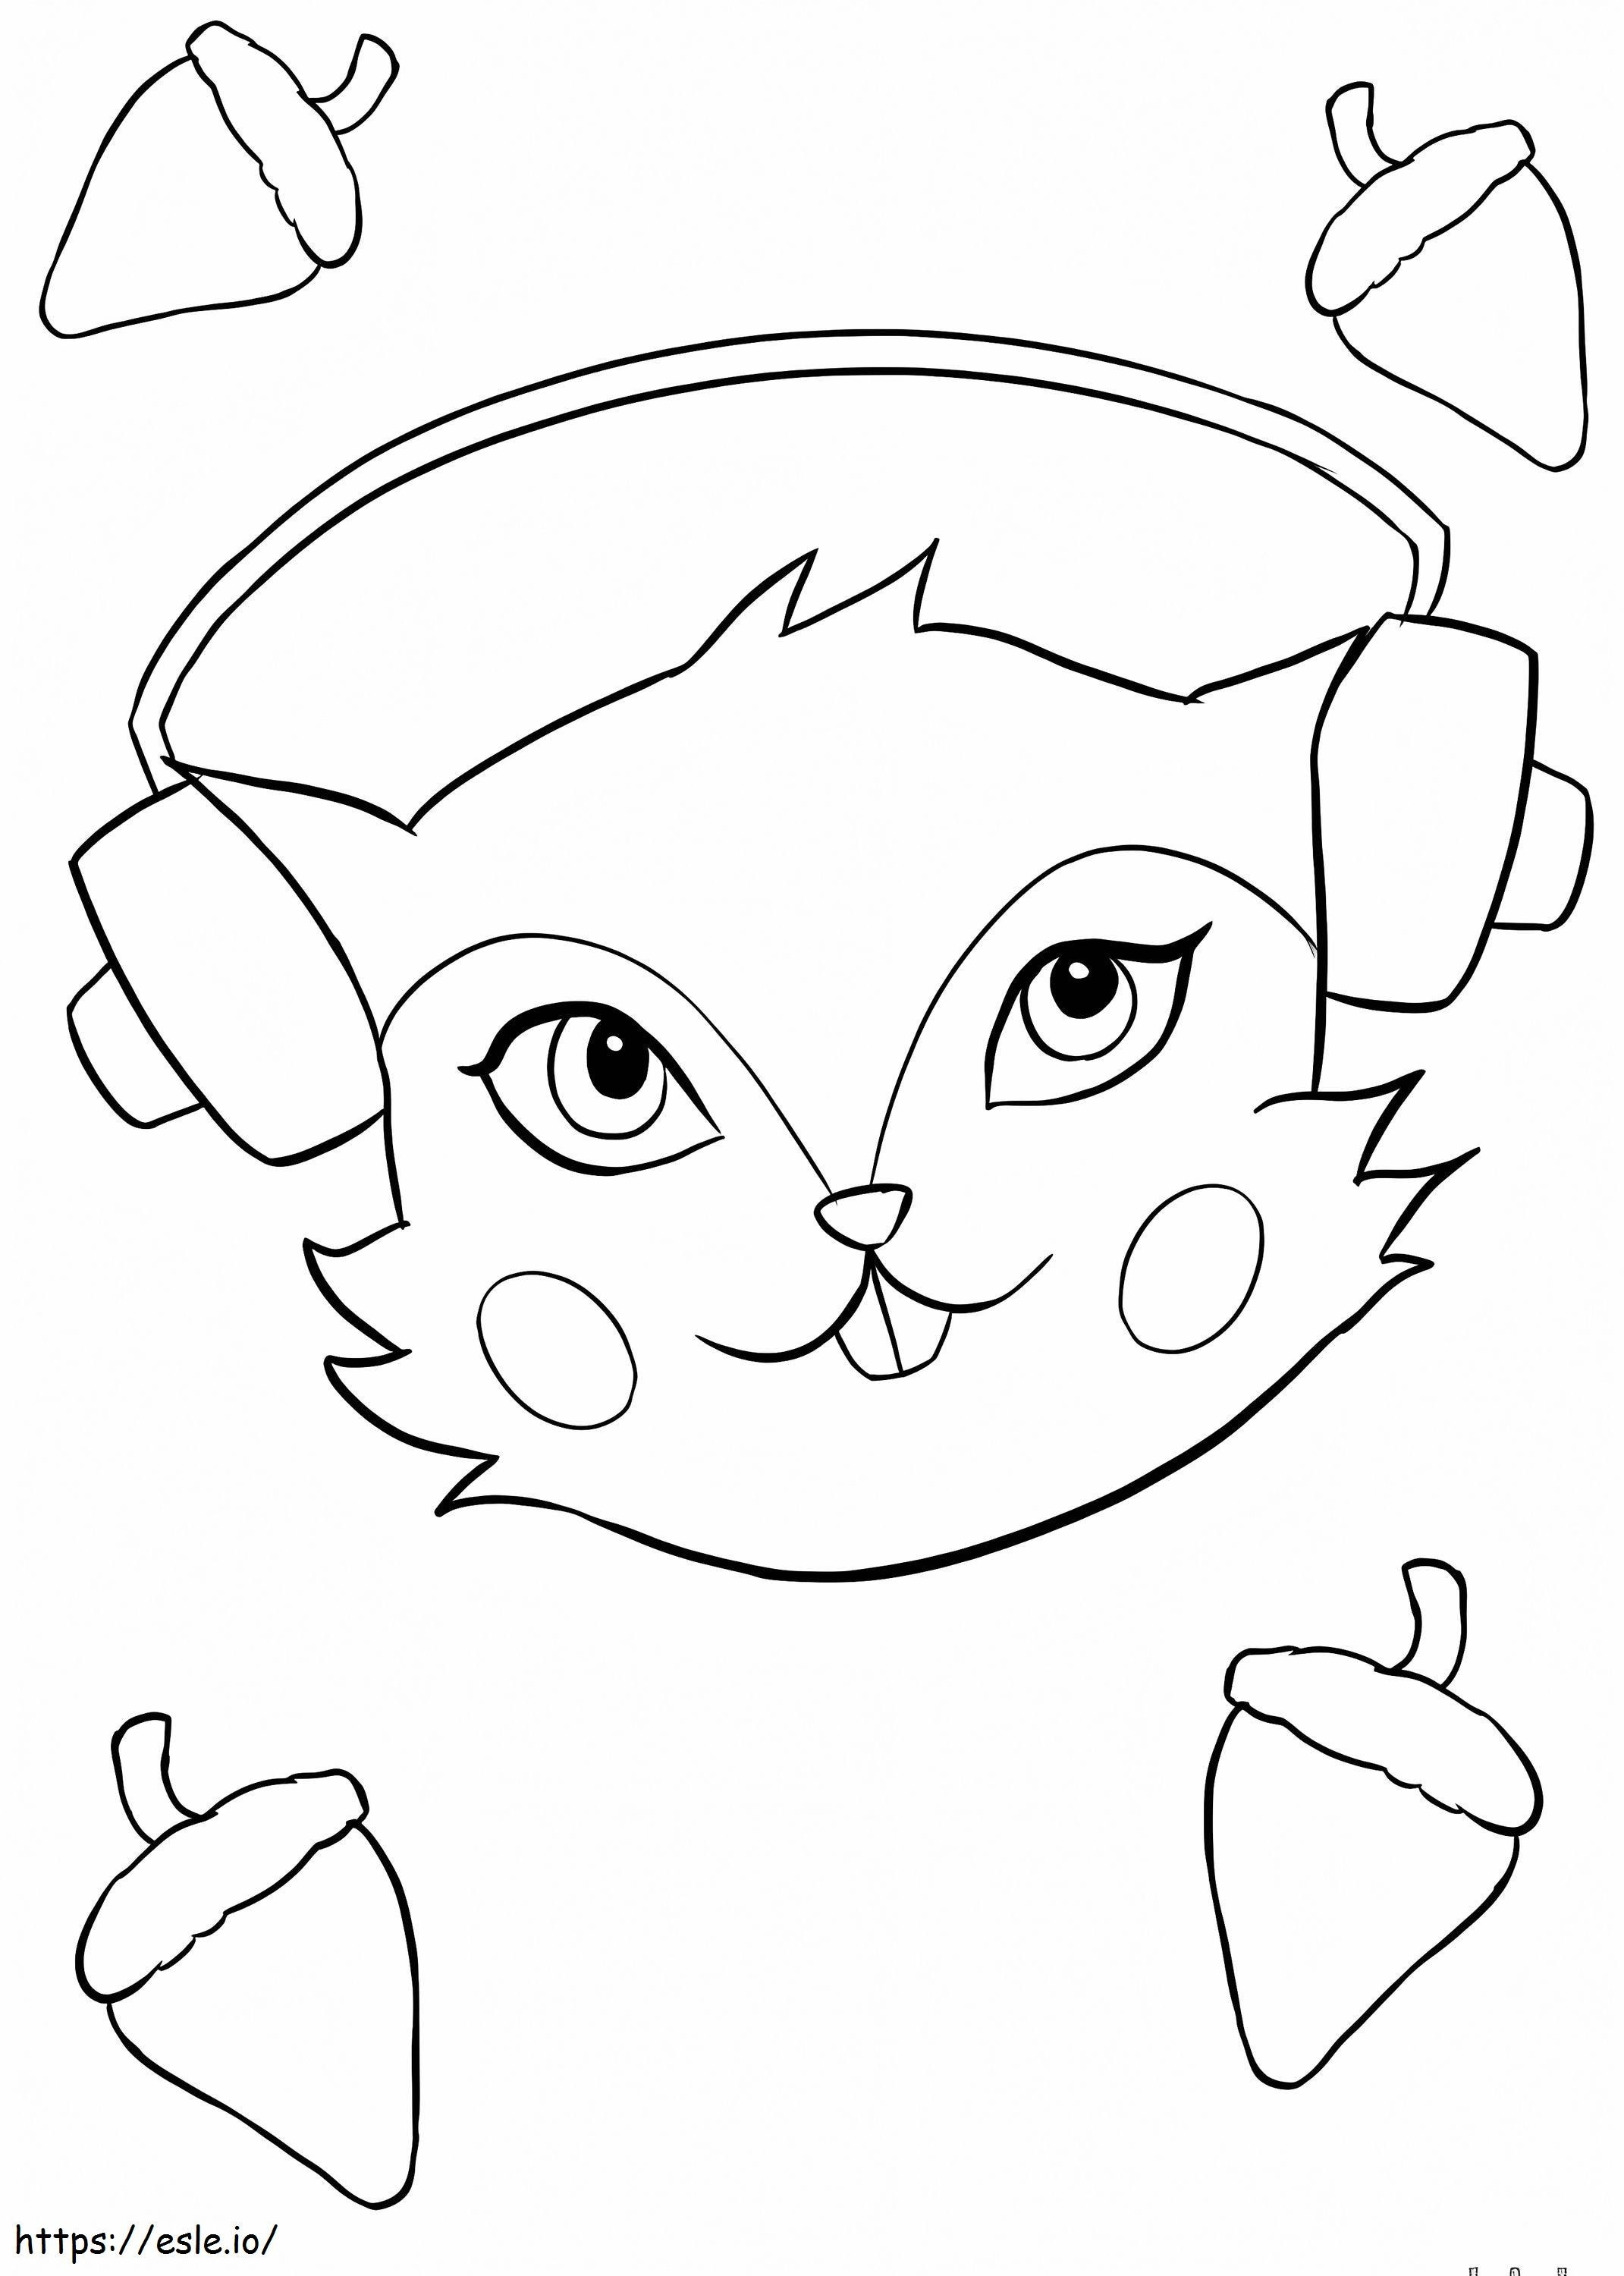 Cool Chipmunk coloring page